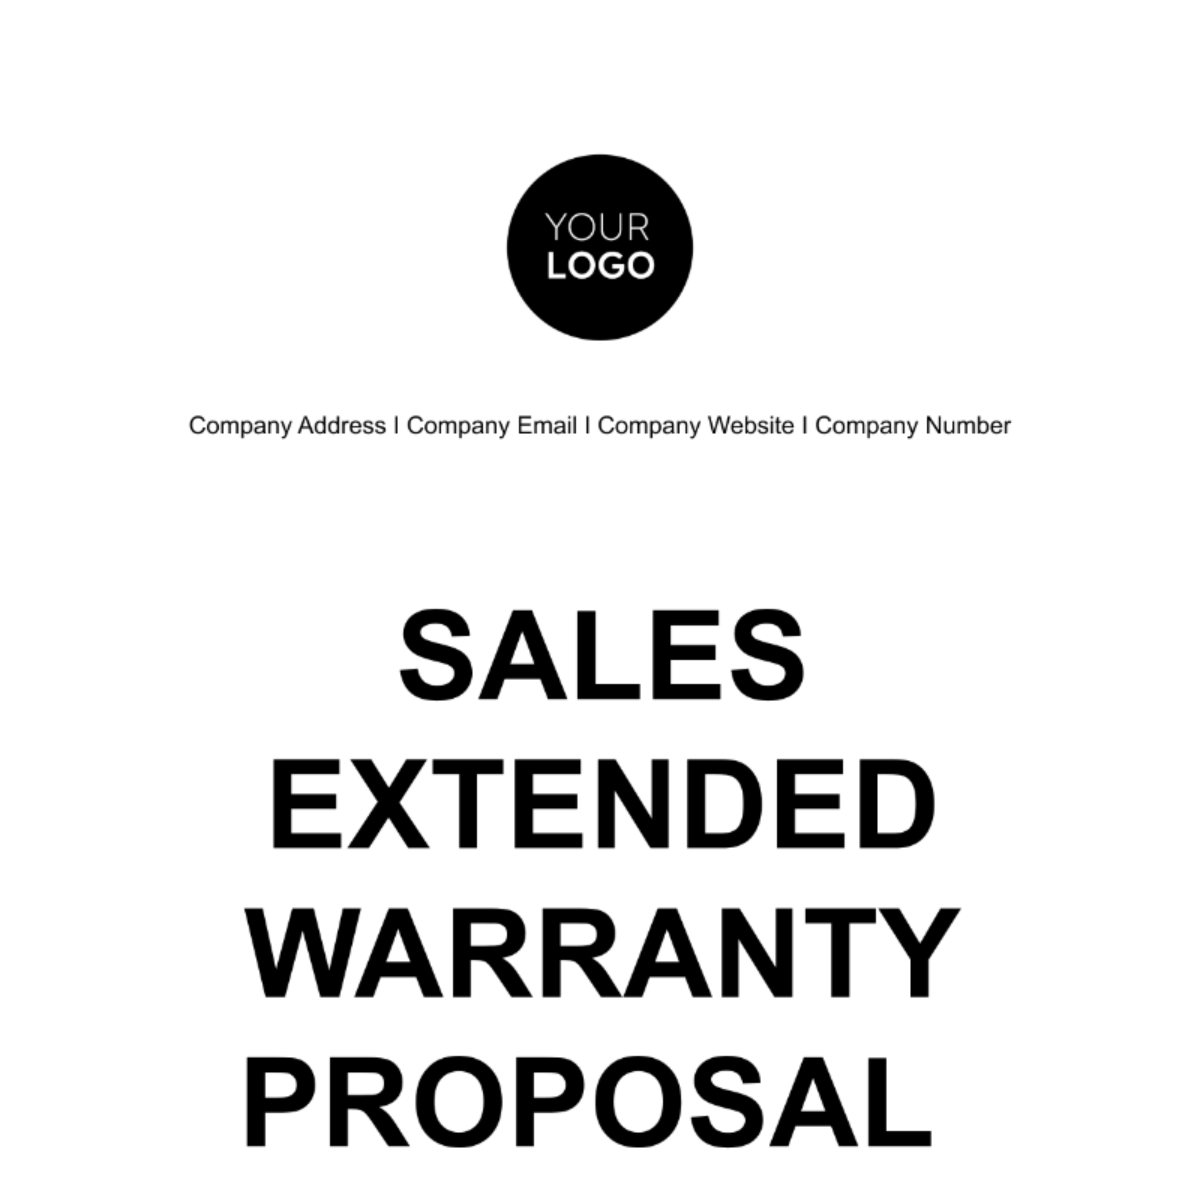 Free Sales Extended Warranty Proposal Template